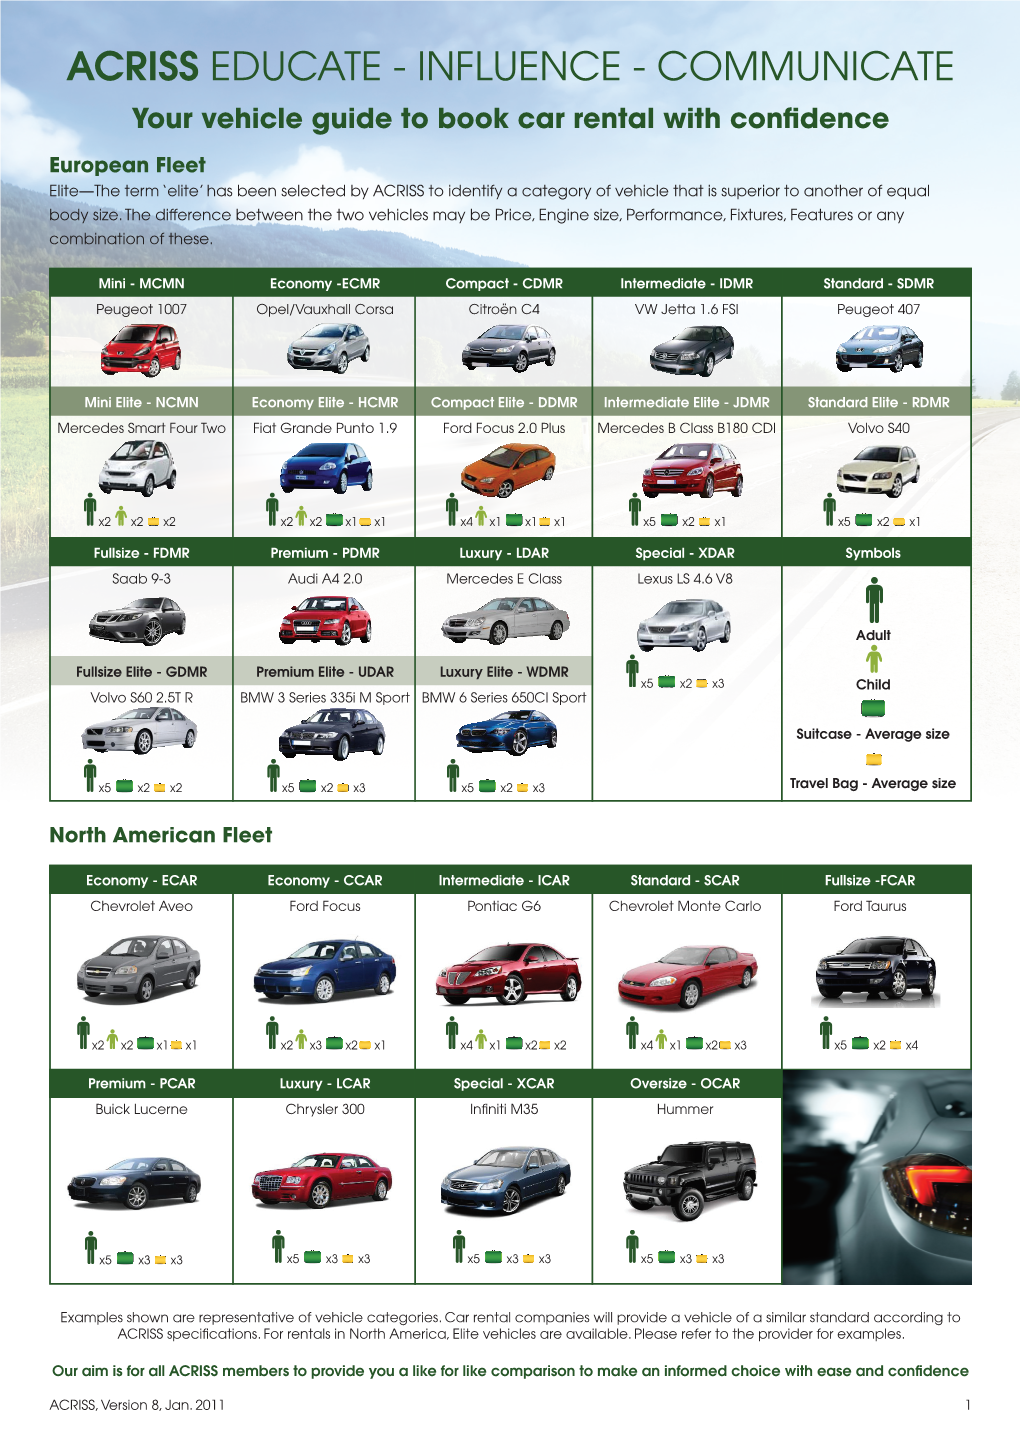 ACRISS EDUCATE - INFLUENCE - COMMUNICATE Your Vehicle Guide to Book Car Rental with Confidence